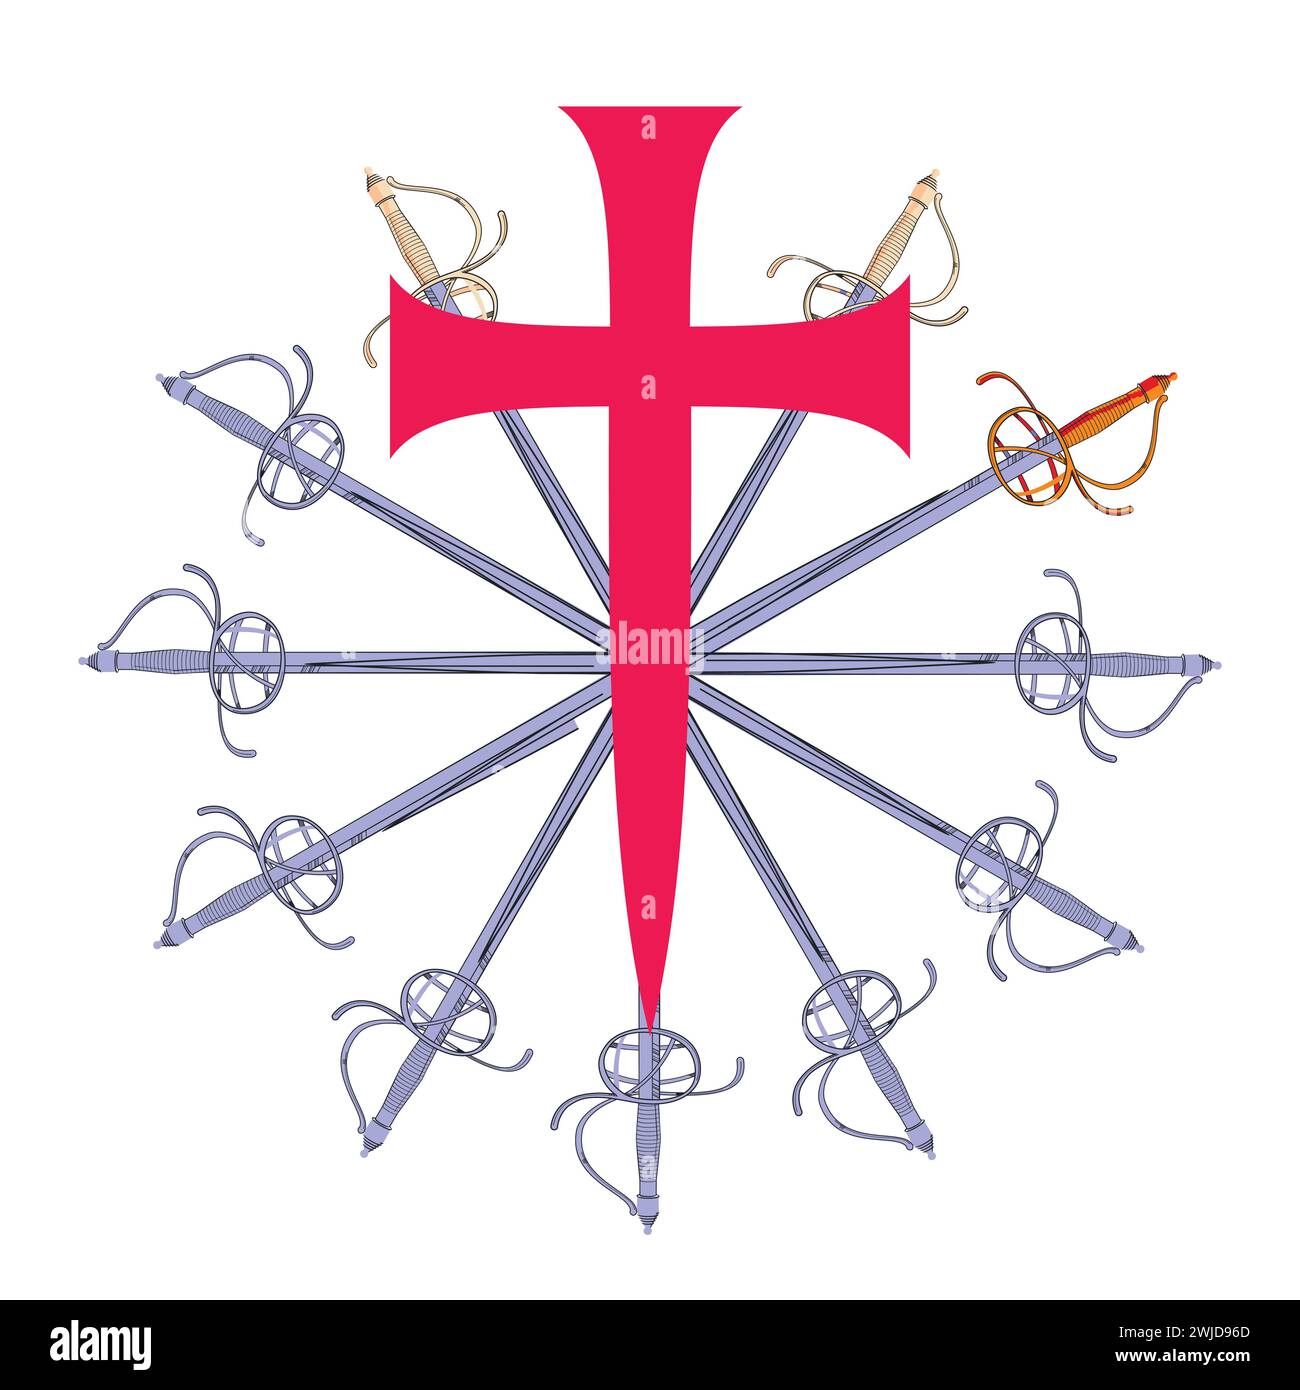 T-shirt design of a large medieval cross with a set of Renaissance swords in a circle. Stock Vector